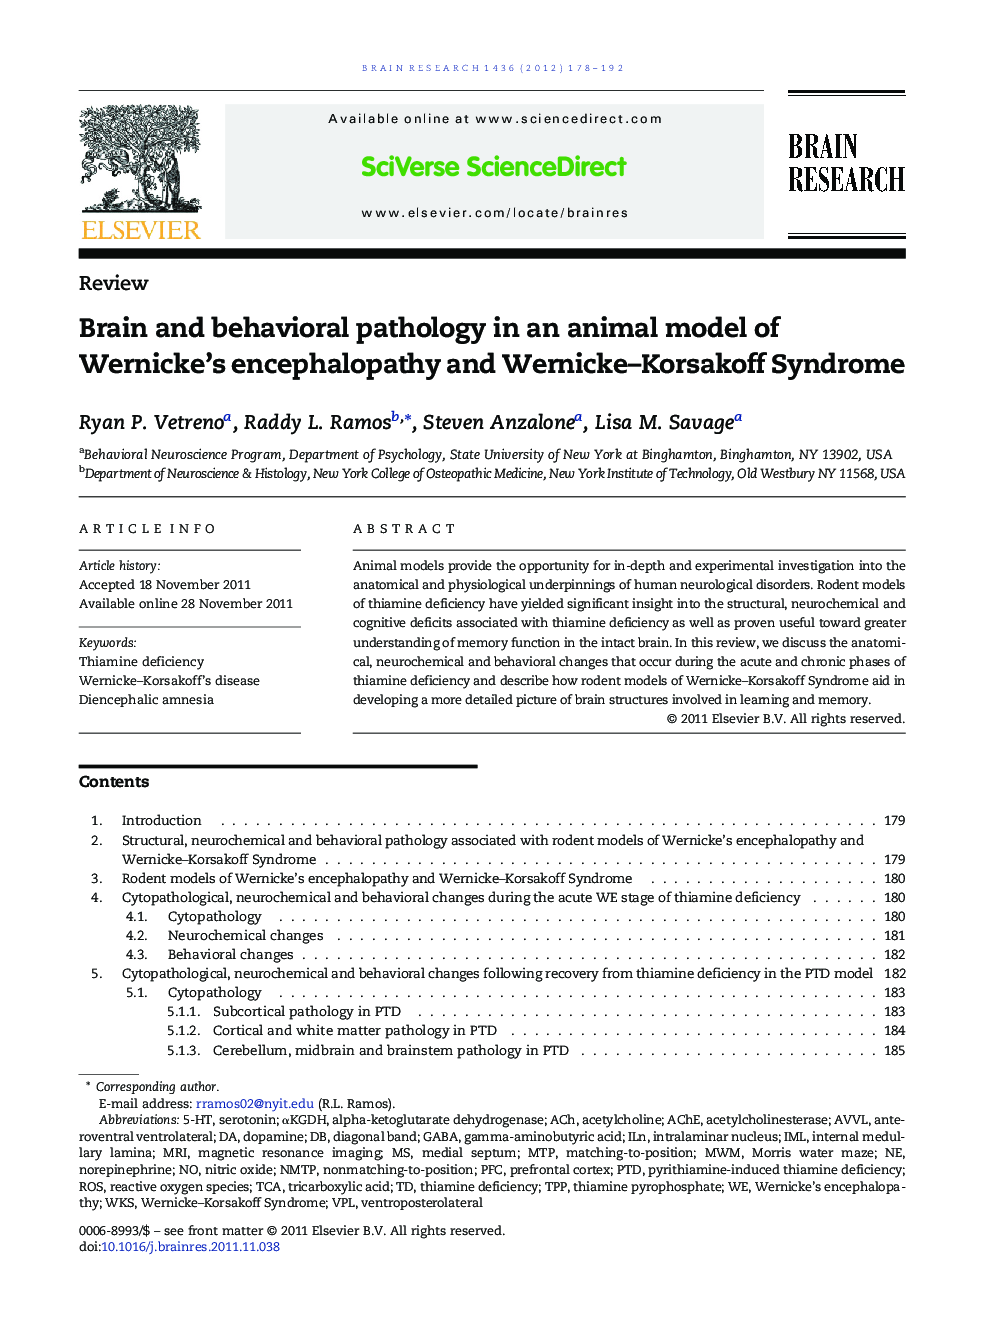 ReviewBrain and behavioral pathology in an animal model of Wernicke's encephalopathy and Wernicke-Korsakoff Syndrome